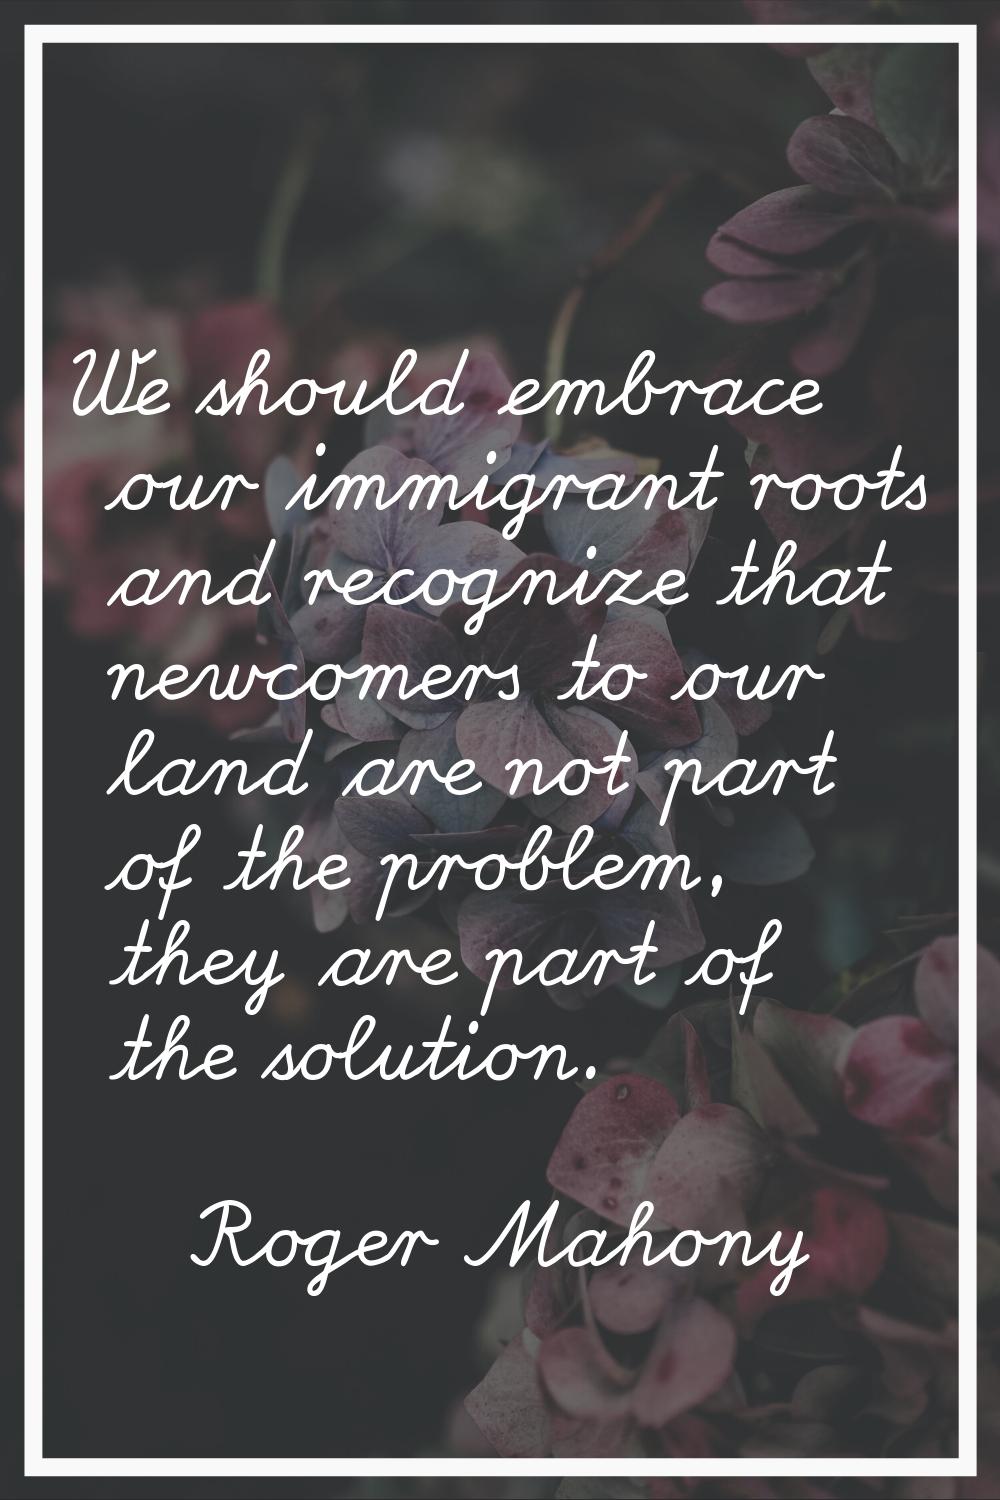 We should embrace our immigrant roots and recognize that newcomers to our land are not part of the 